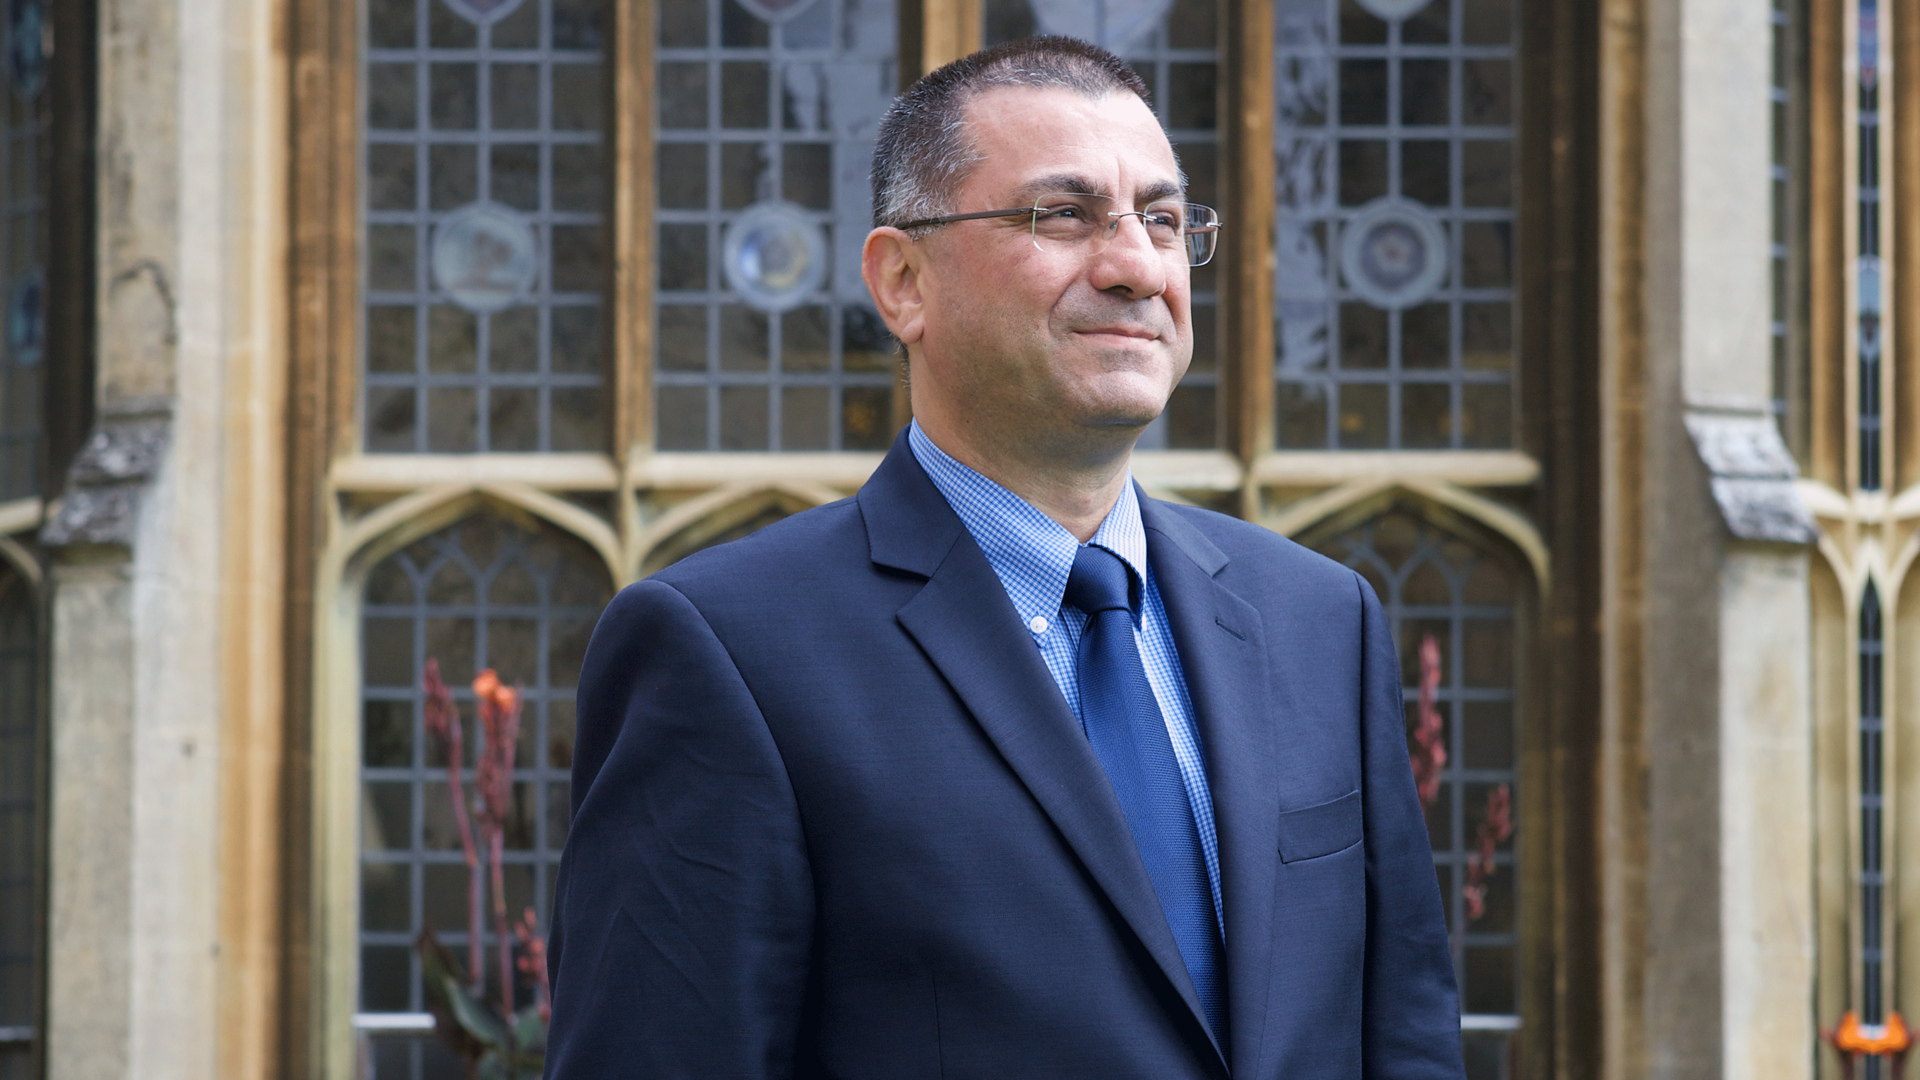 University professor with glasses and blue suit poses in front of a campus building at University of Oxford